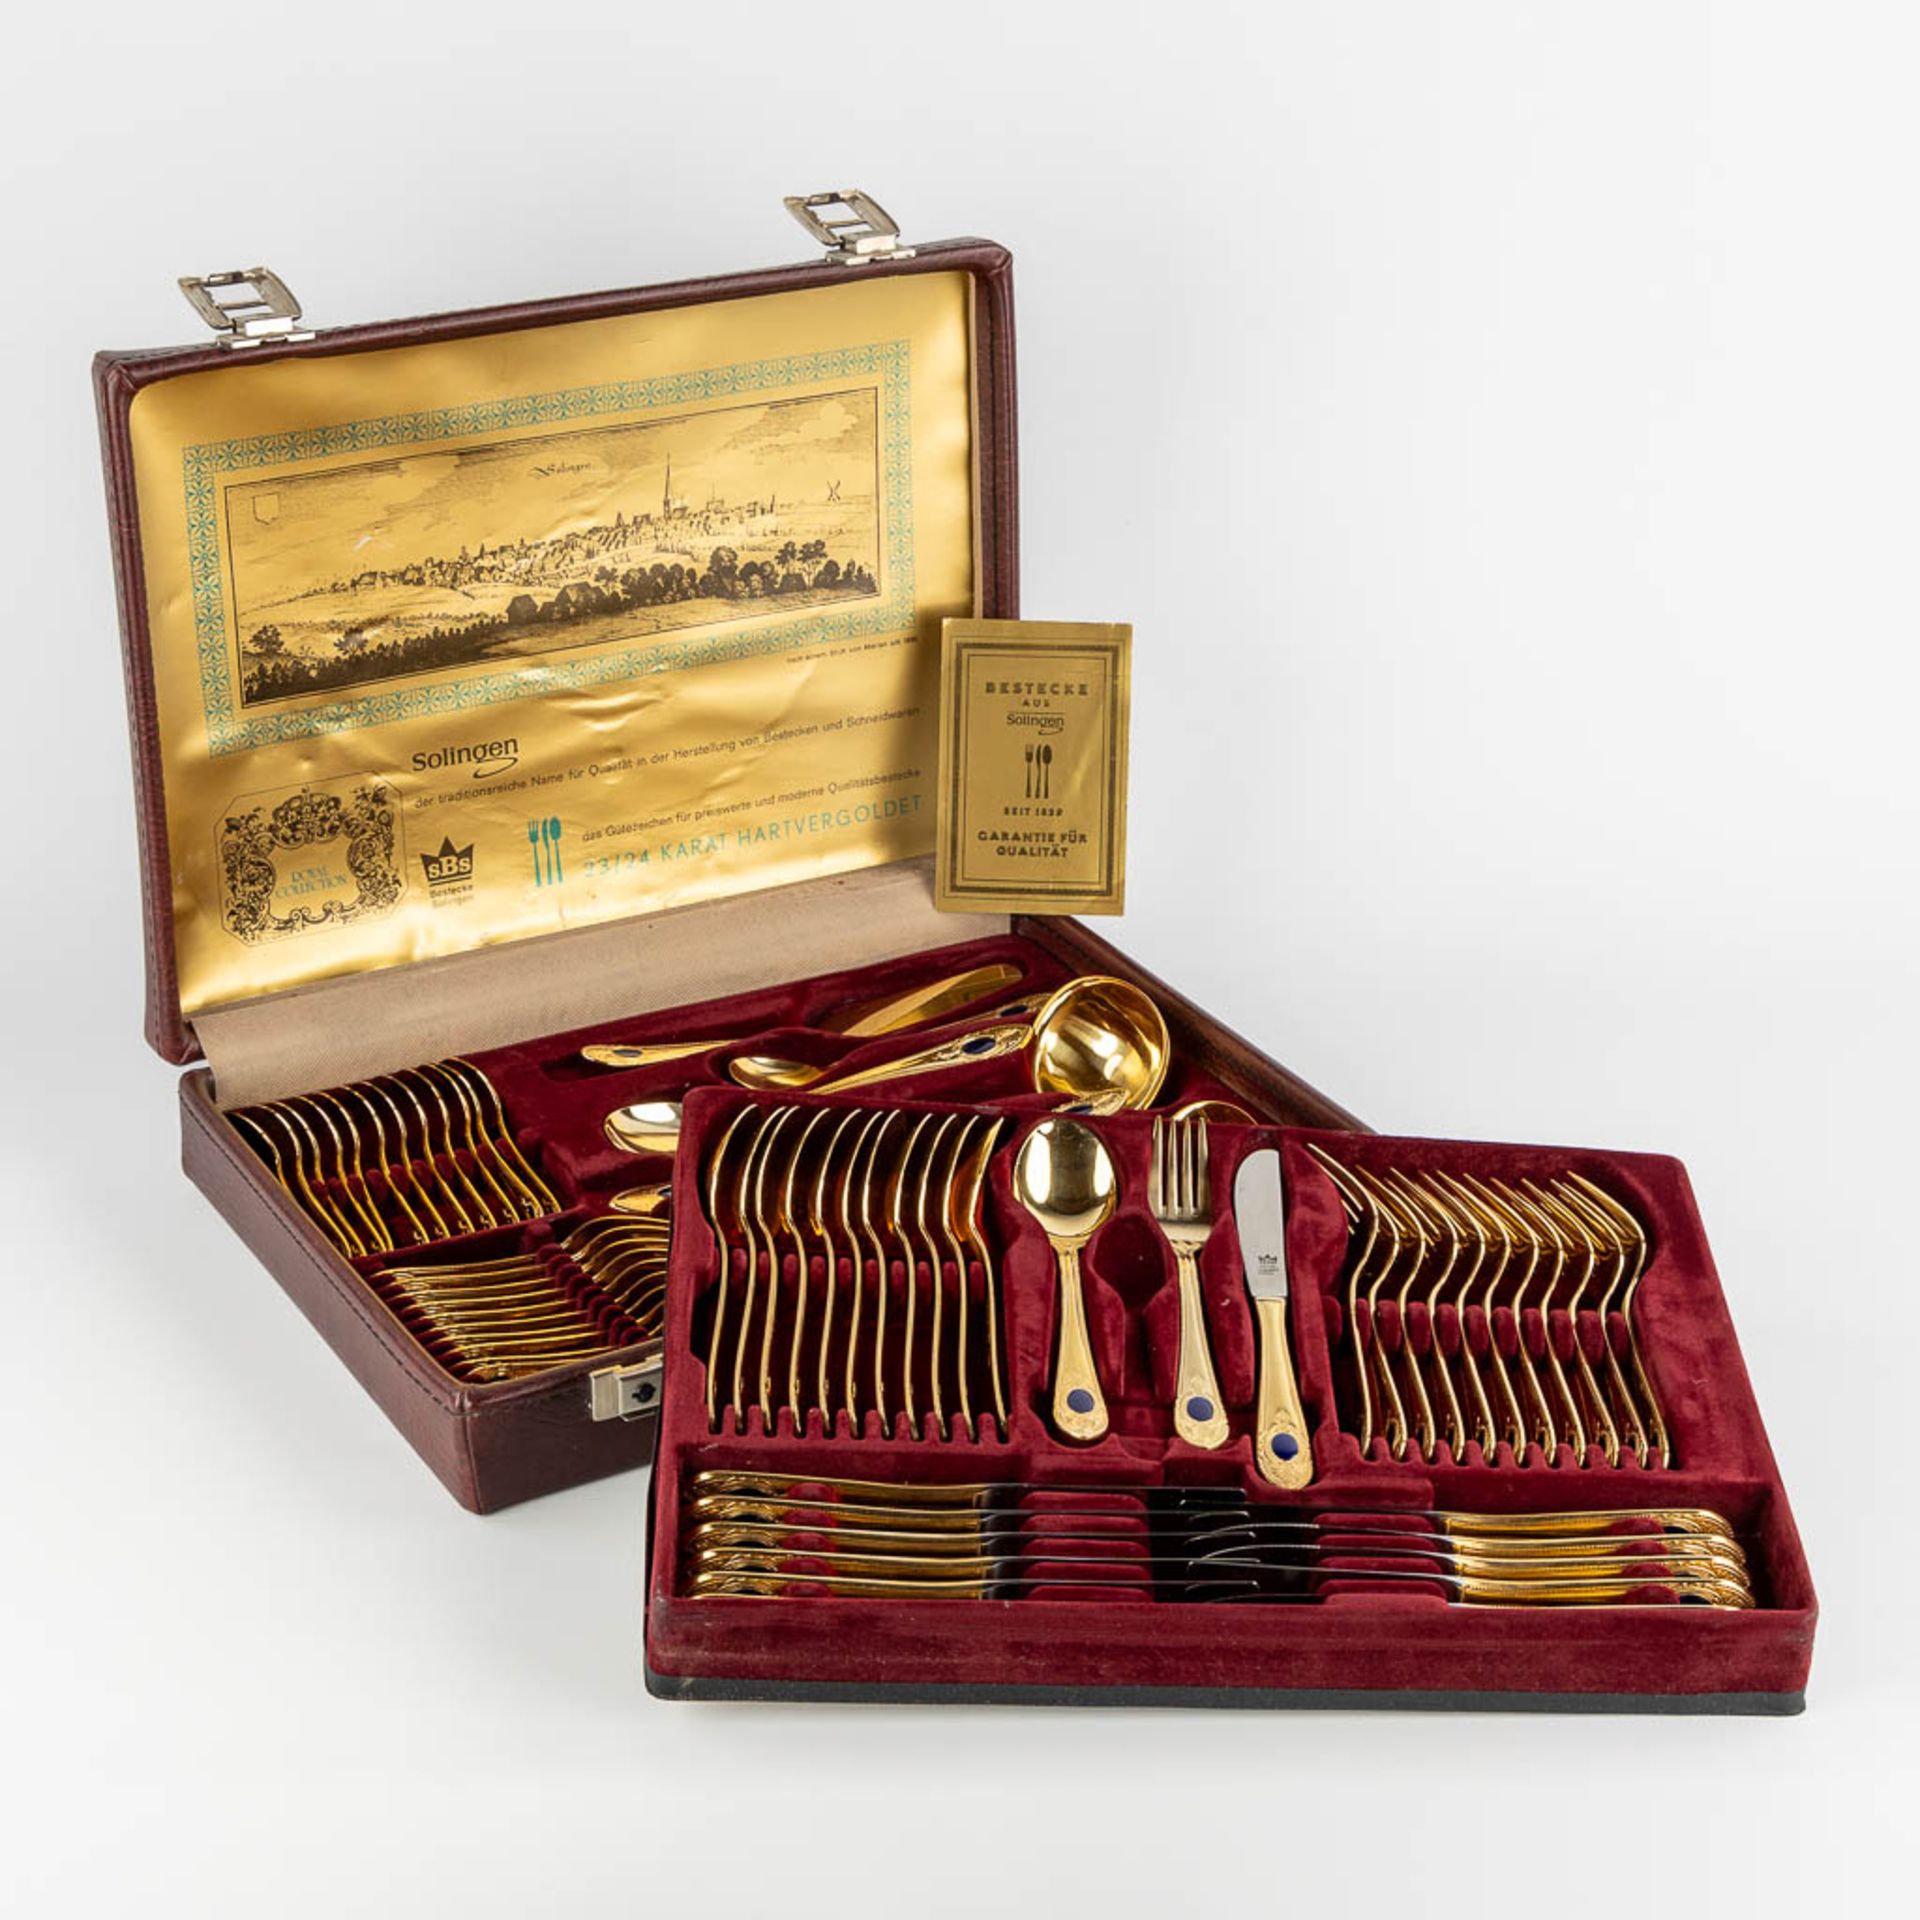 A gold-plated 'Bestecke Solingen' flatware cutlery set, made in Germany. (L:33 x W:45,5 x H:9,5 cm)